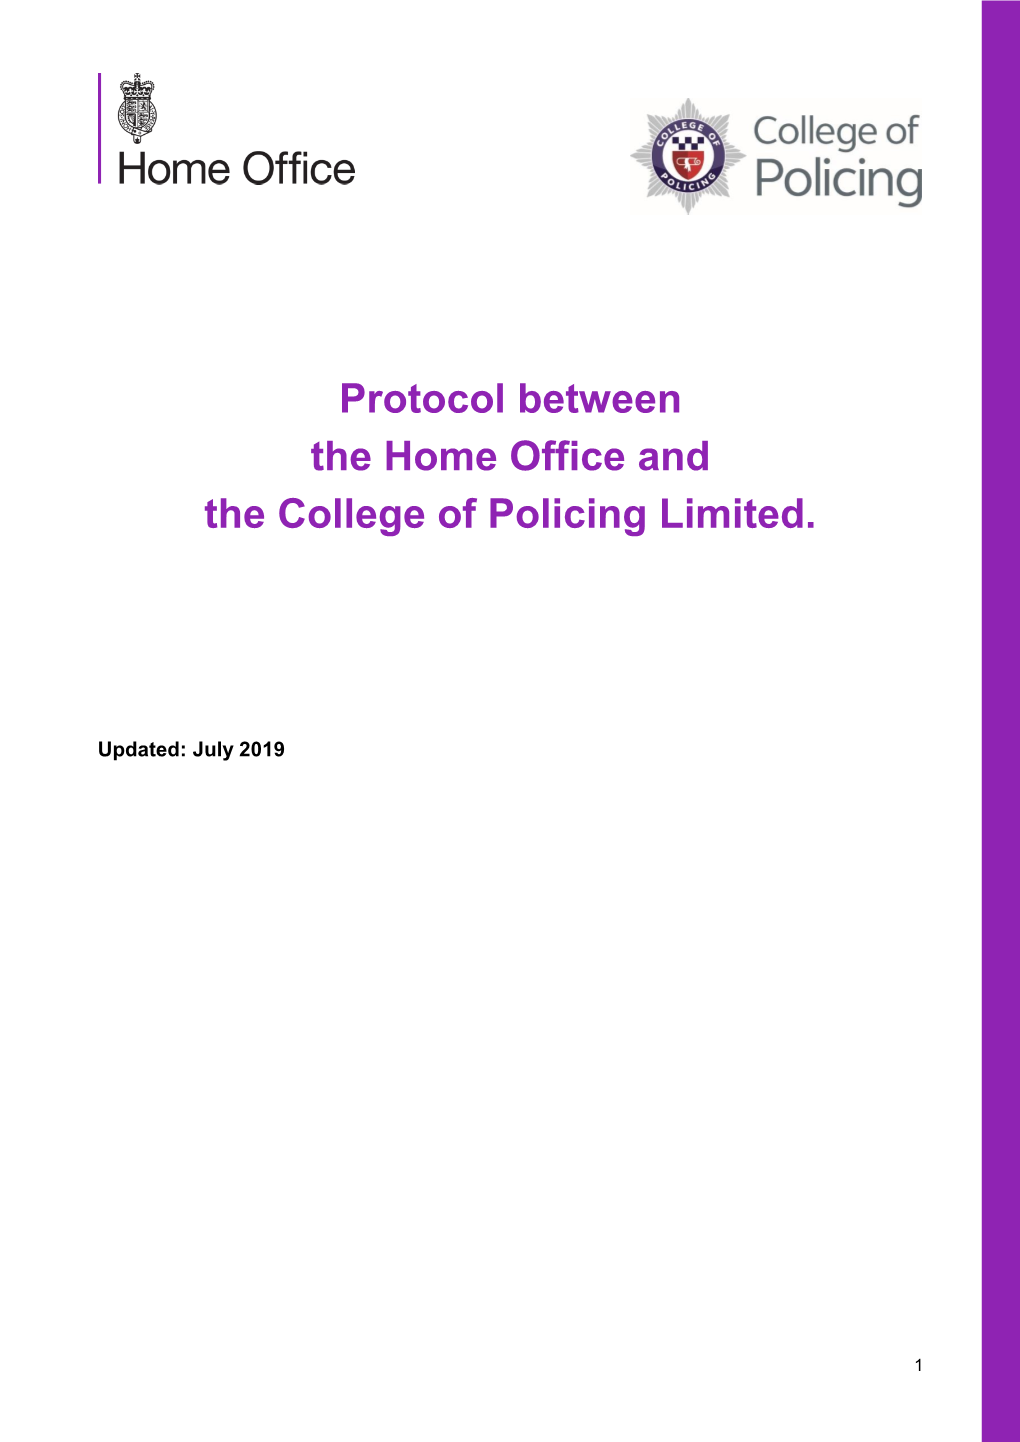 Protocol Between the Home Office and the College of Policing Limited